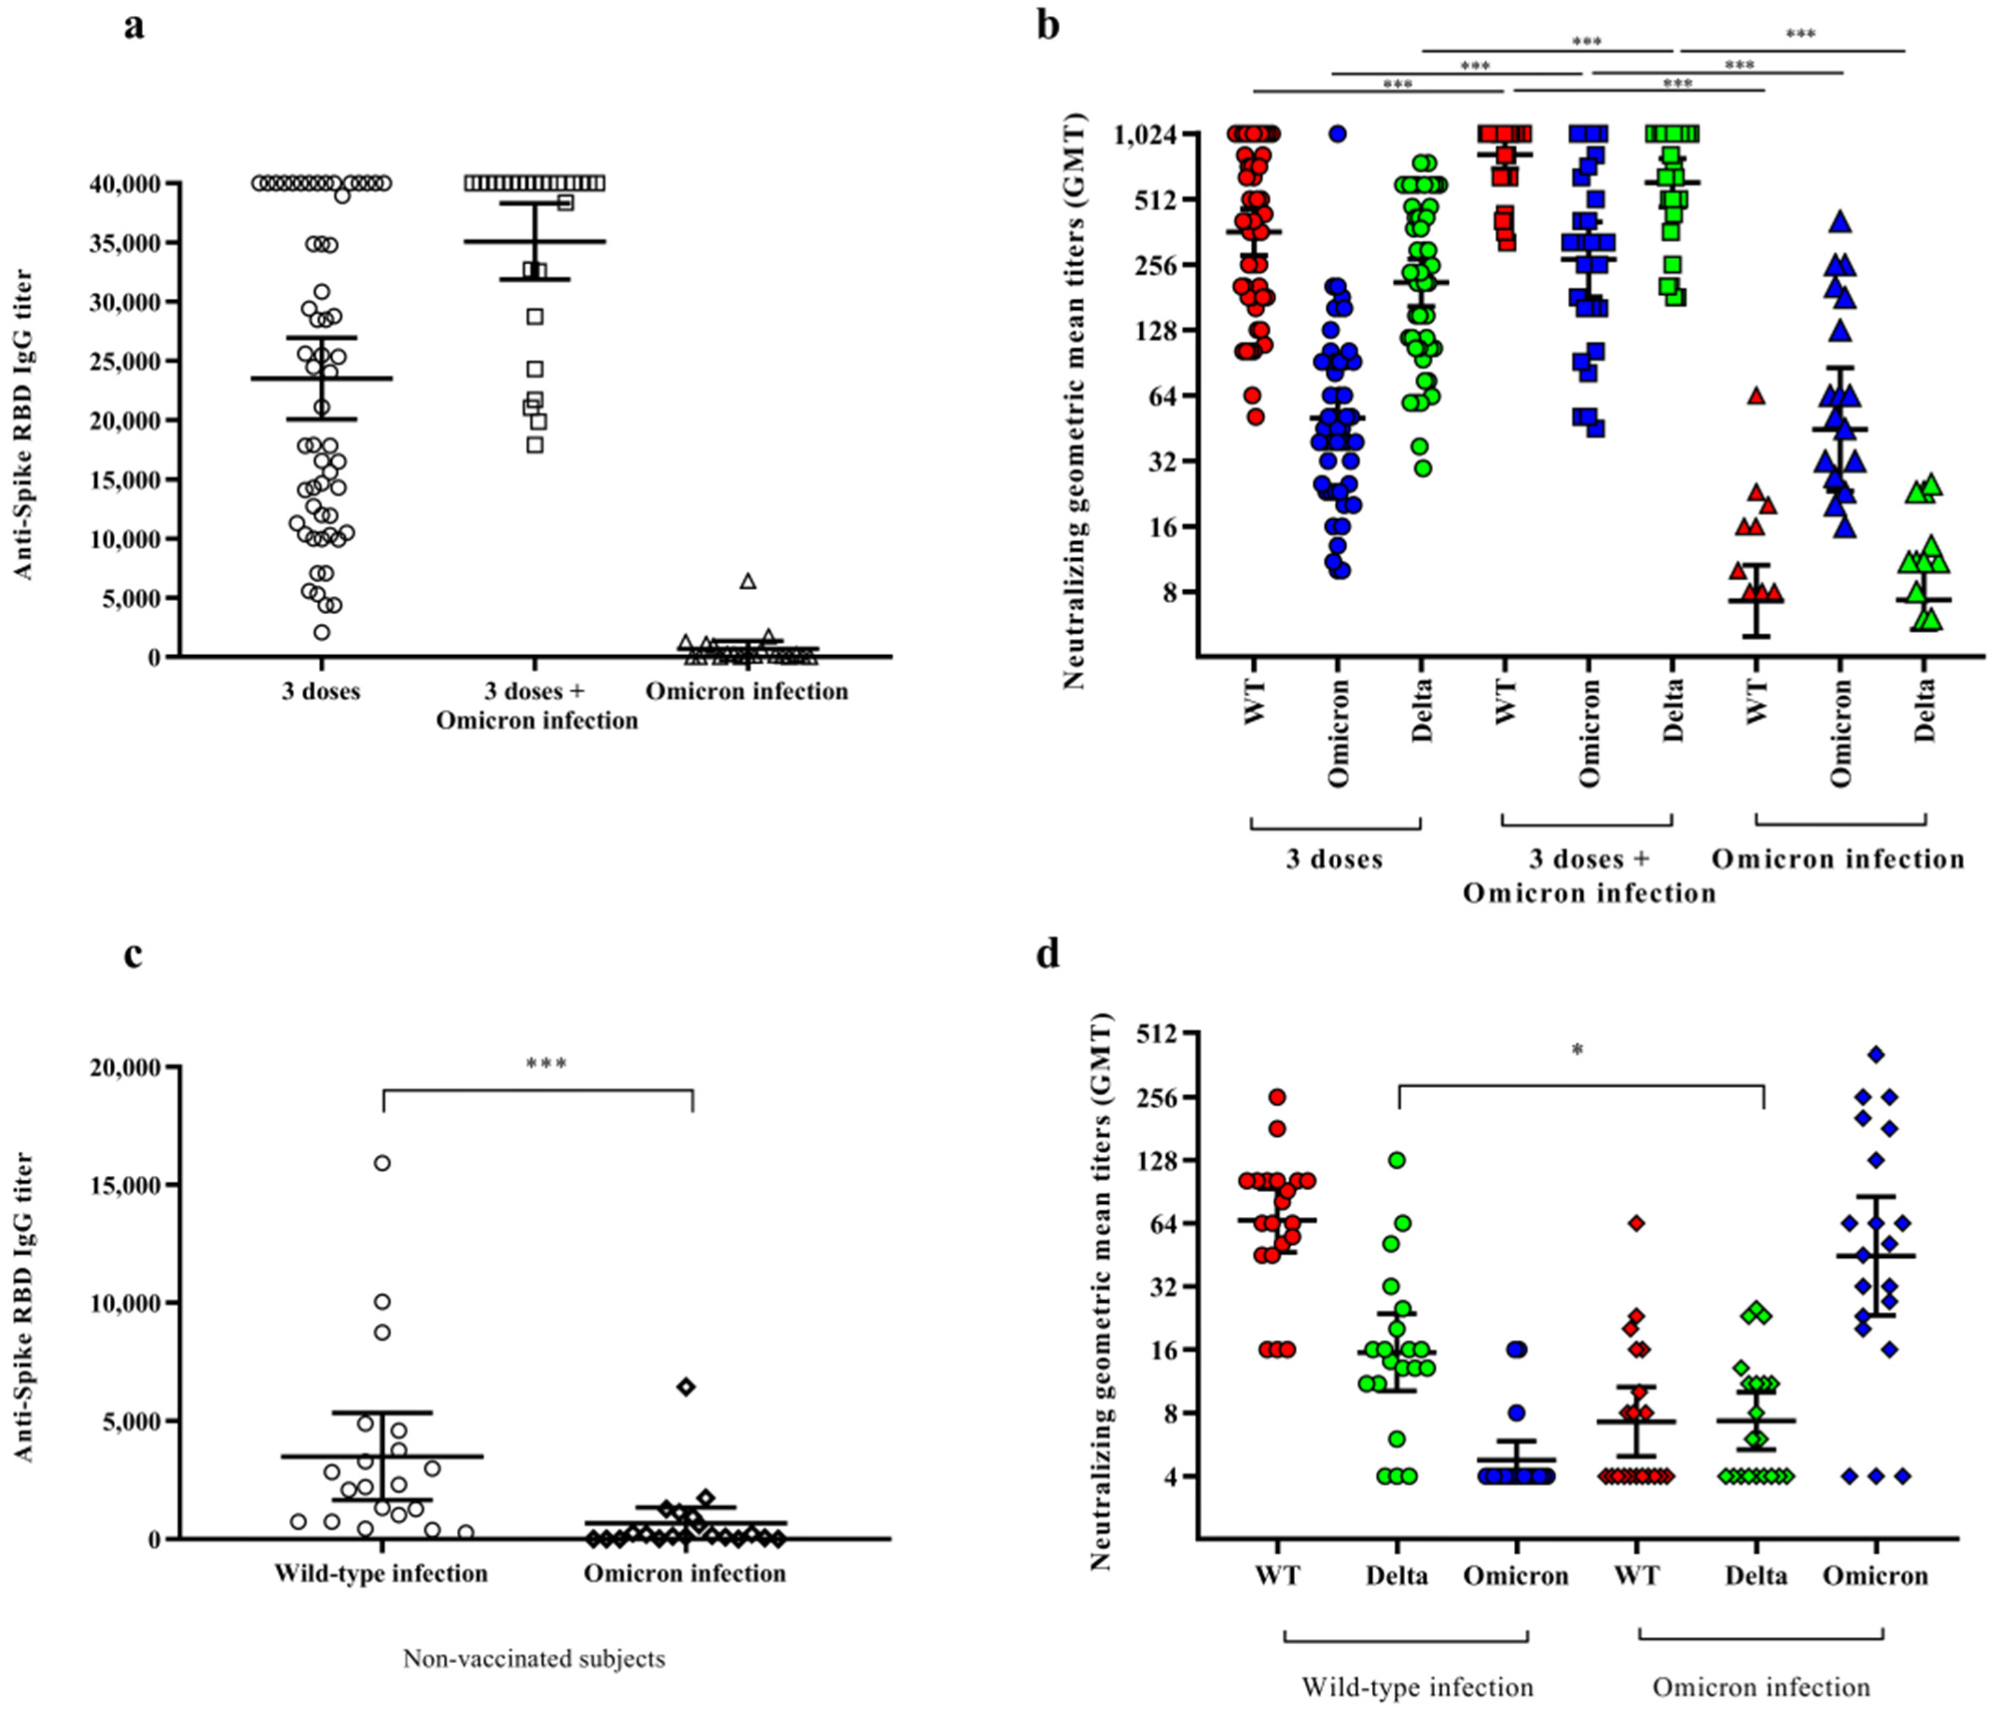 Immune response in vaccinated subjects, who either had or did not have a SARS-CoV-2 infection, and naturally infected subjects. Titers of anti-spike IgG antibodies (Panels (a,c)) and neutralizing SARS-CoV-2 antibodies (Panels (b,d)) in serum samples of subjects naturally infected with SARS-CoV-2 (triangles), vaccinated subjects with three doses of mRNA vaccine (circles), and vaccinees infected with the Omicron variant (squares). Differences in neutralizing IgG antibodies were evaluated against WT (red), Delta (B.1.617.2) (green), and Omicron (BA.1) (blue) strains (Panel (b)). Comparison of serum samples of WT infected subjects (circles) with those of Omicron infected subjects (rhombuses) against the three variants (Panel (d)). In each plot, the horizontal line represents the mean (Panels (a,c)) or the geometric mean (Panels (b,d)), while the top and bottom lines show the 95% confidence interval (CI 95%). The p values are reported in the figures, where * stands for p < 0.05 and *** stands for p < 0.001.